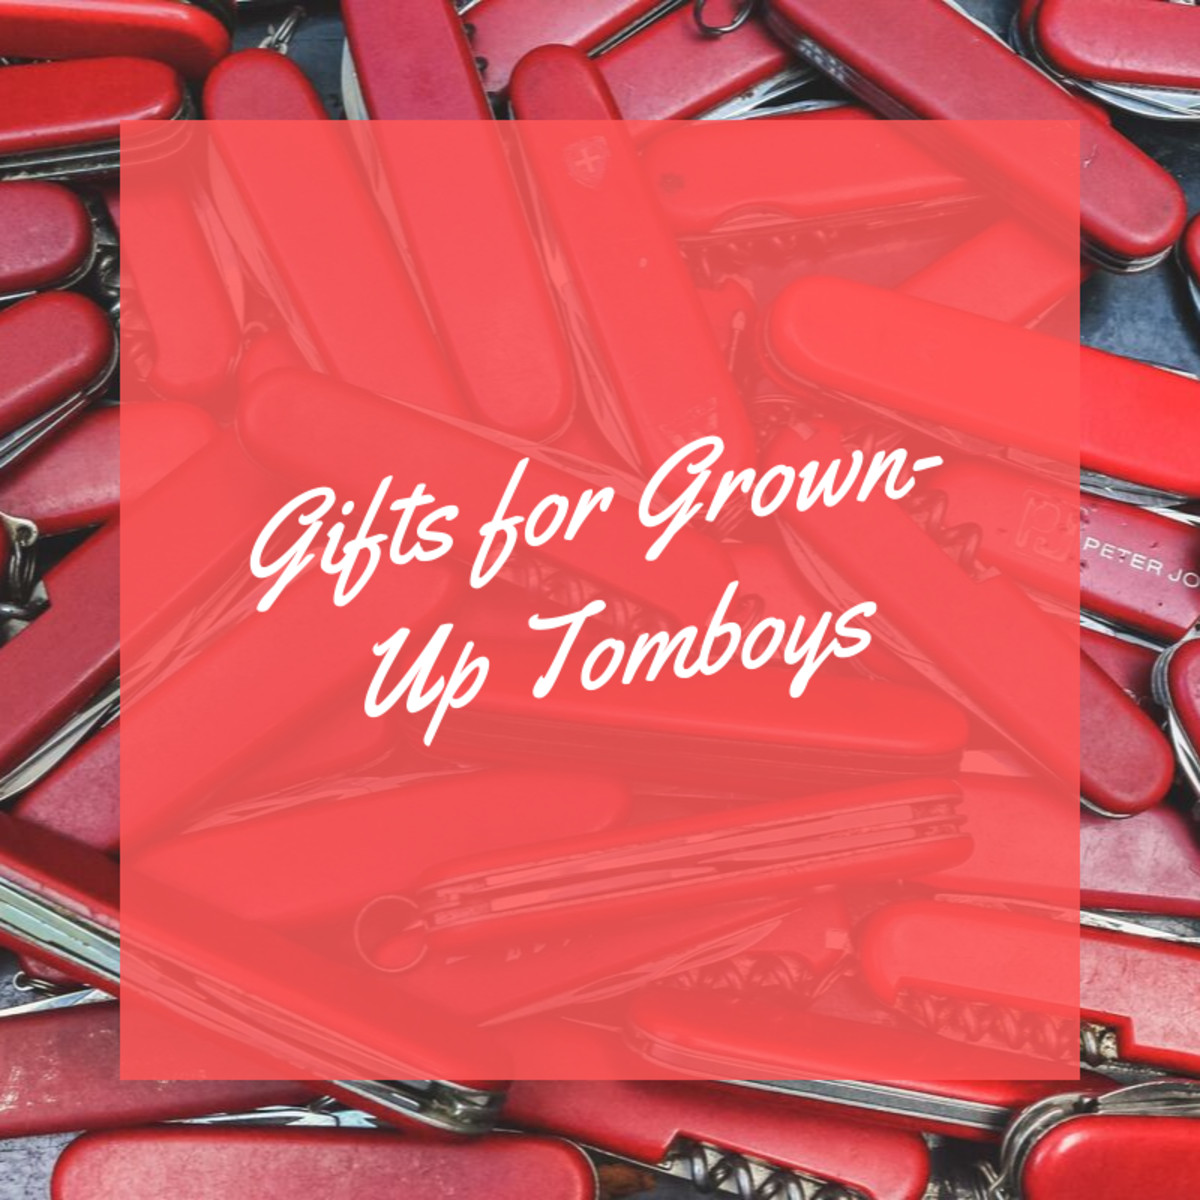 Gift Ideas For Tomboy Girlfriend
 Great Gifts for Grown Up Tomboys